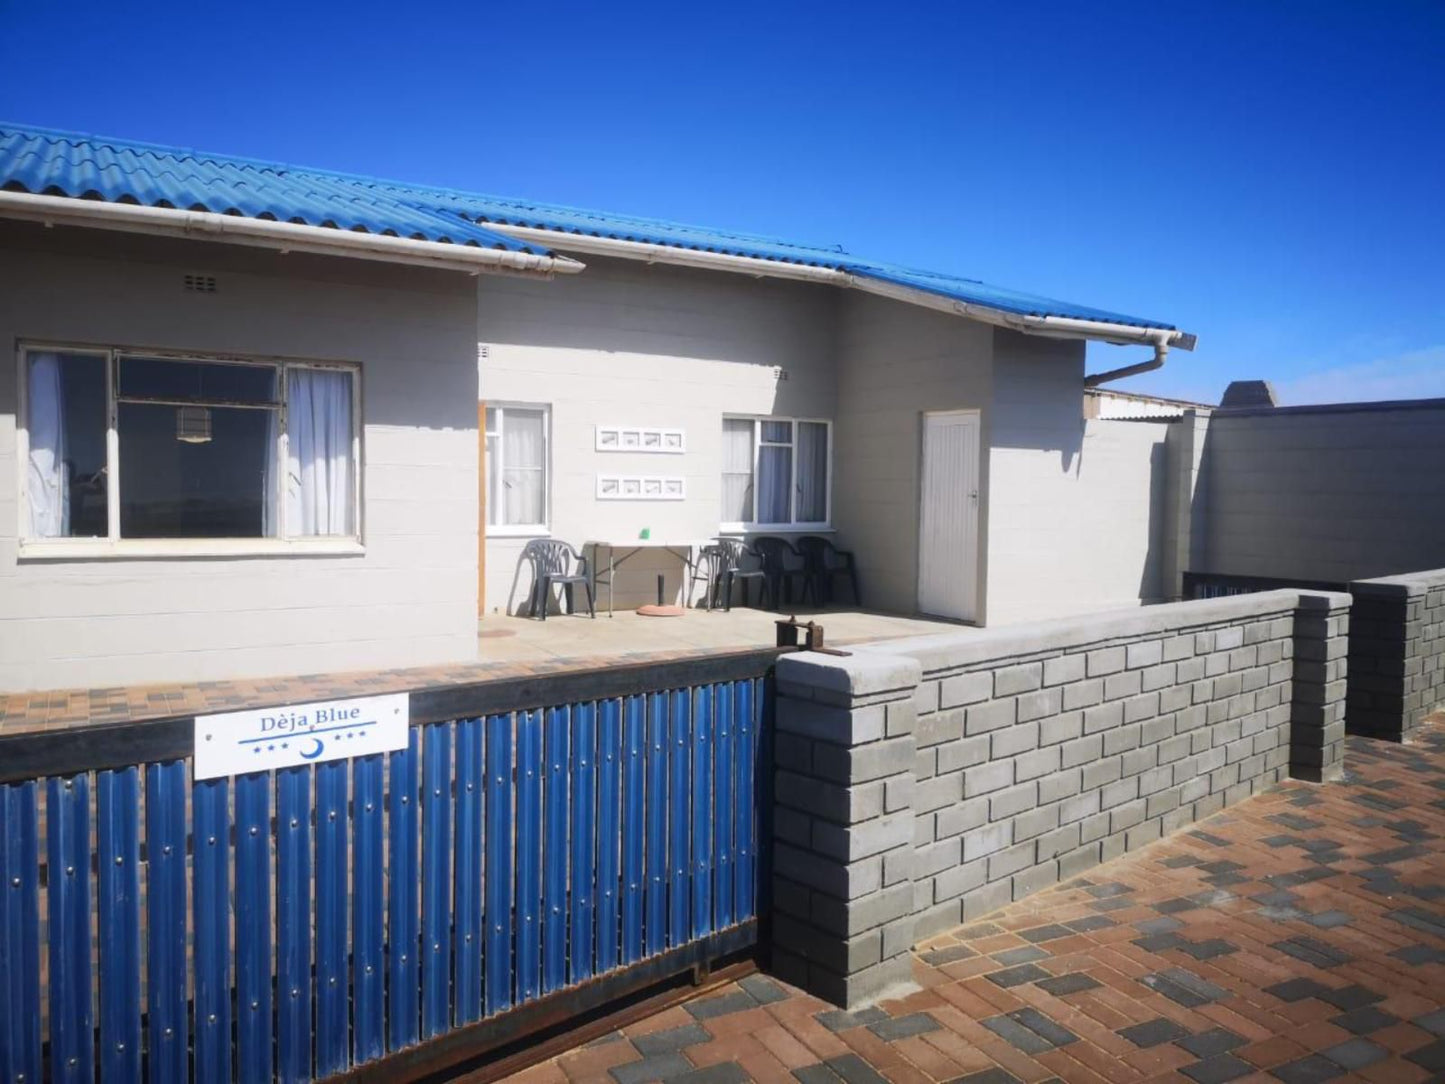 Seezightlaan Self Catering Units Kleinzee Northern Cape South Africa Shipping Container